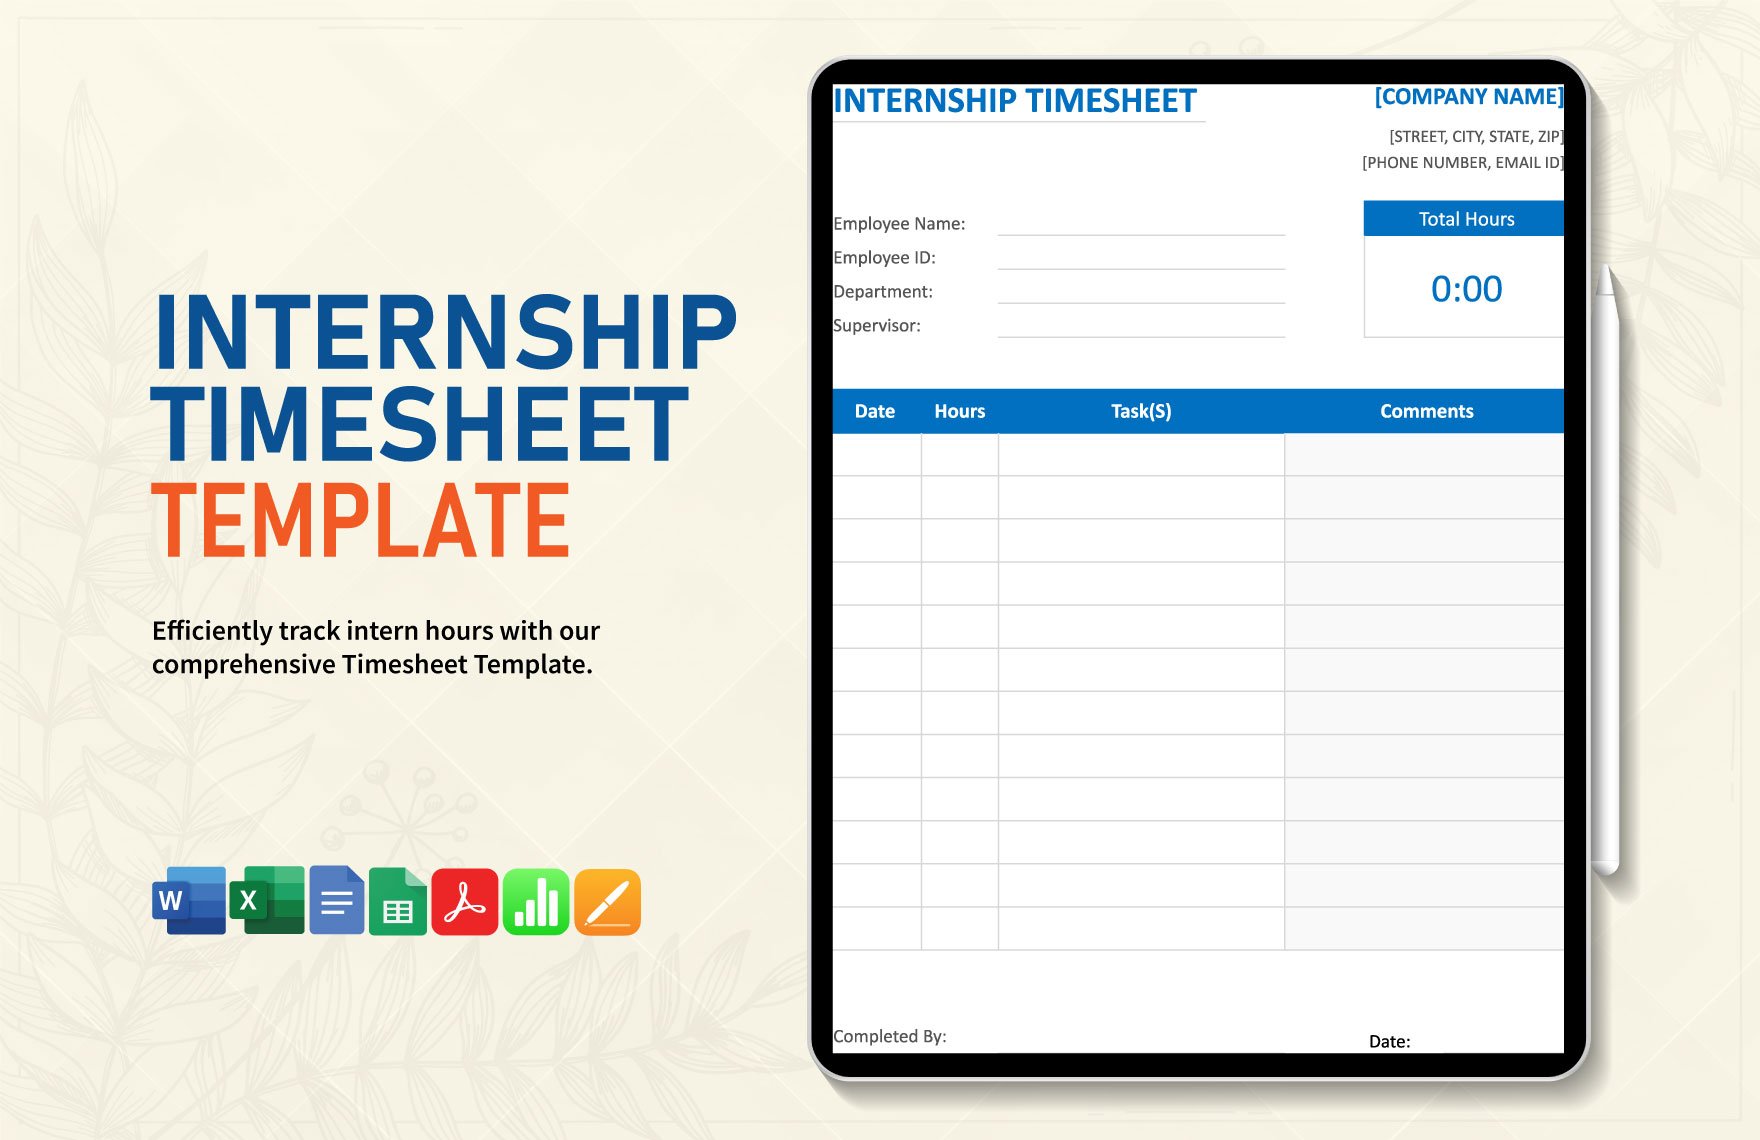 Internship Timesheet Template in Word, Google Docs, Excel, PDF, Google Sheets, Apple Pages, Apple Numbers